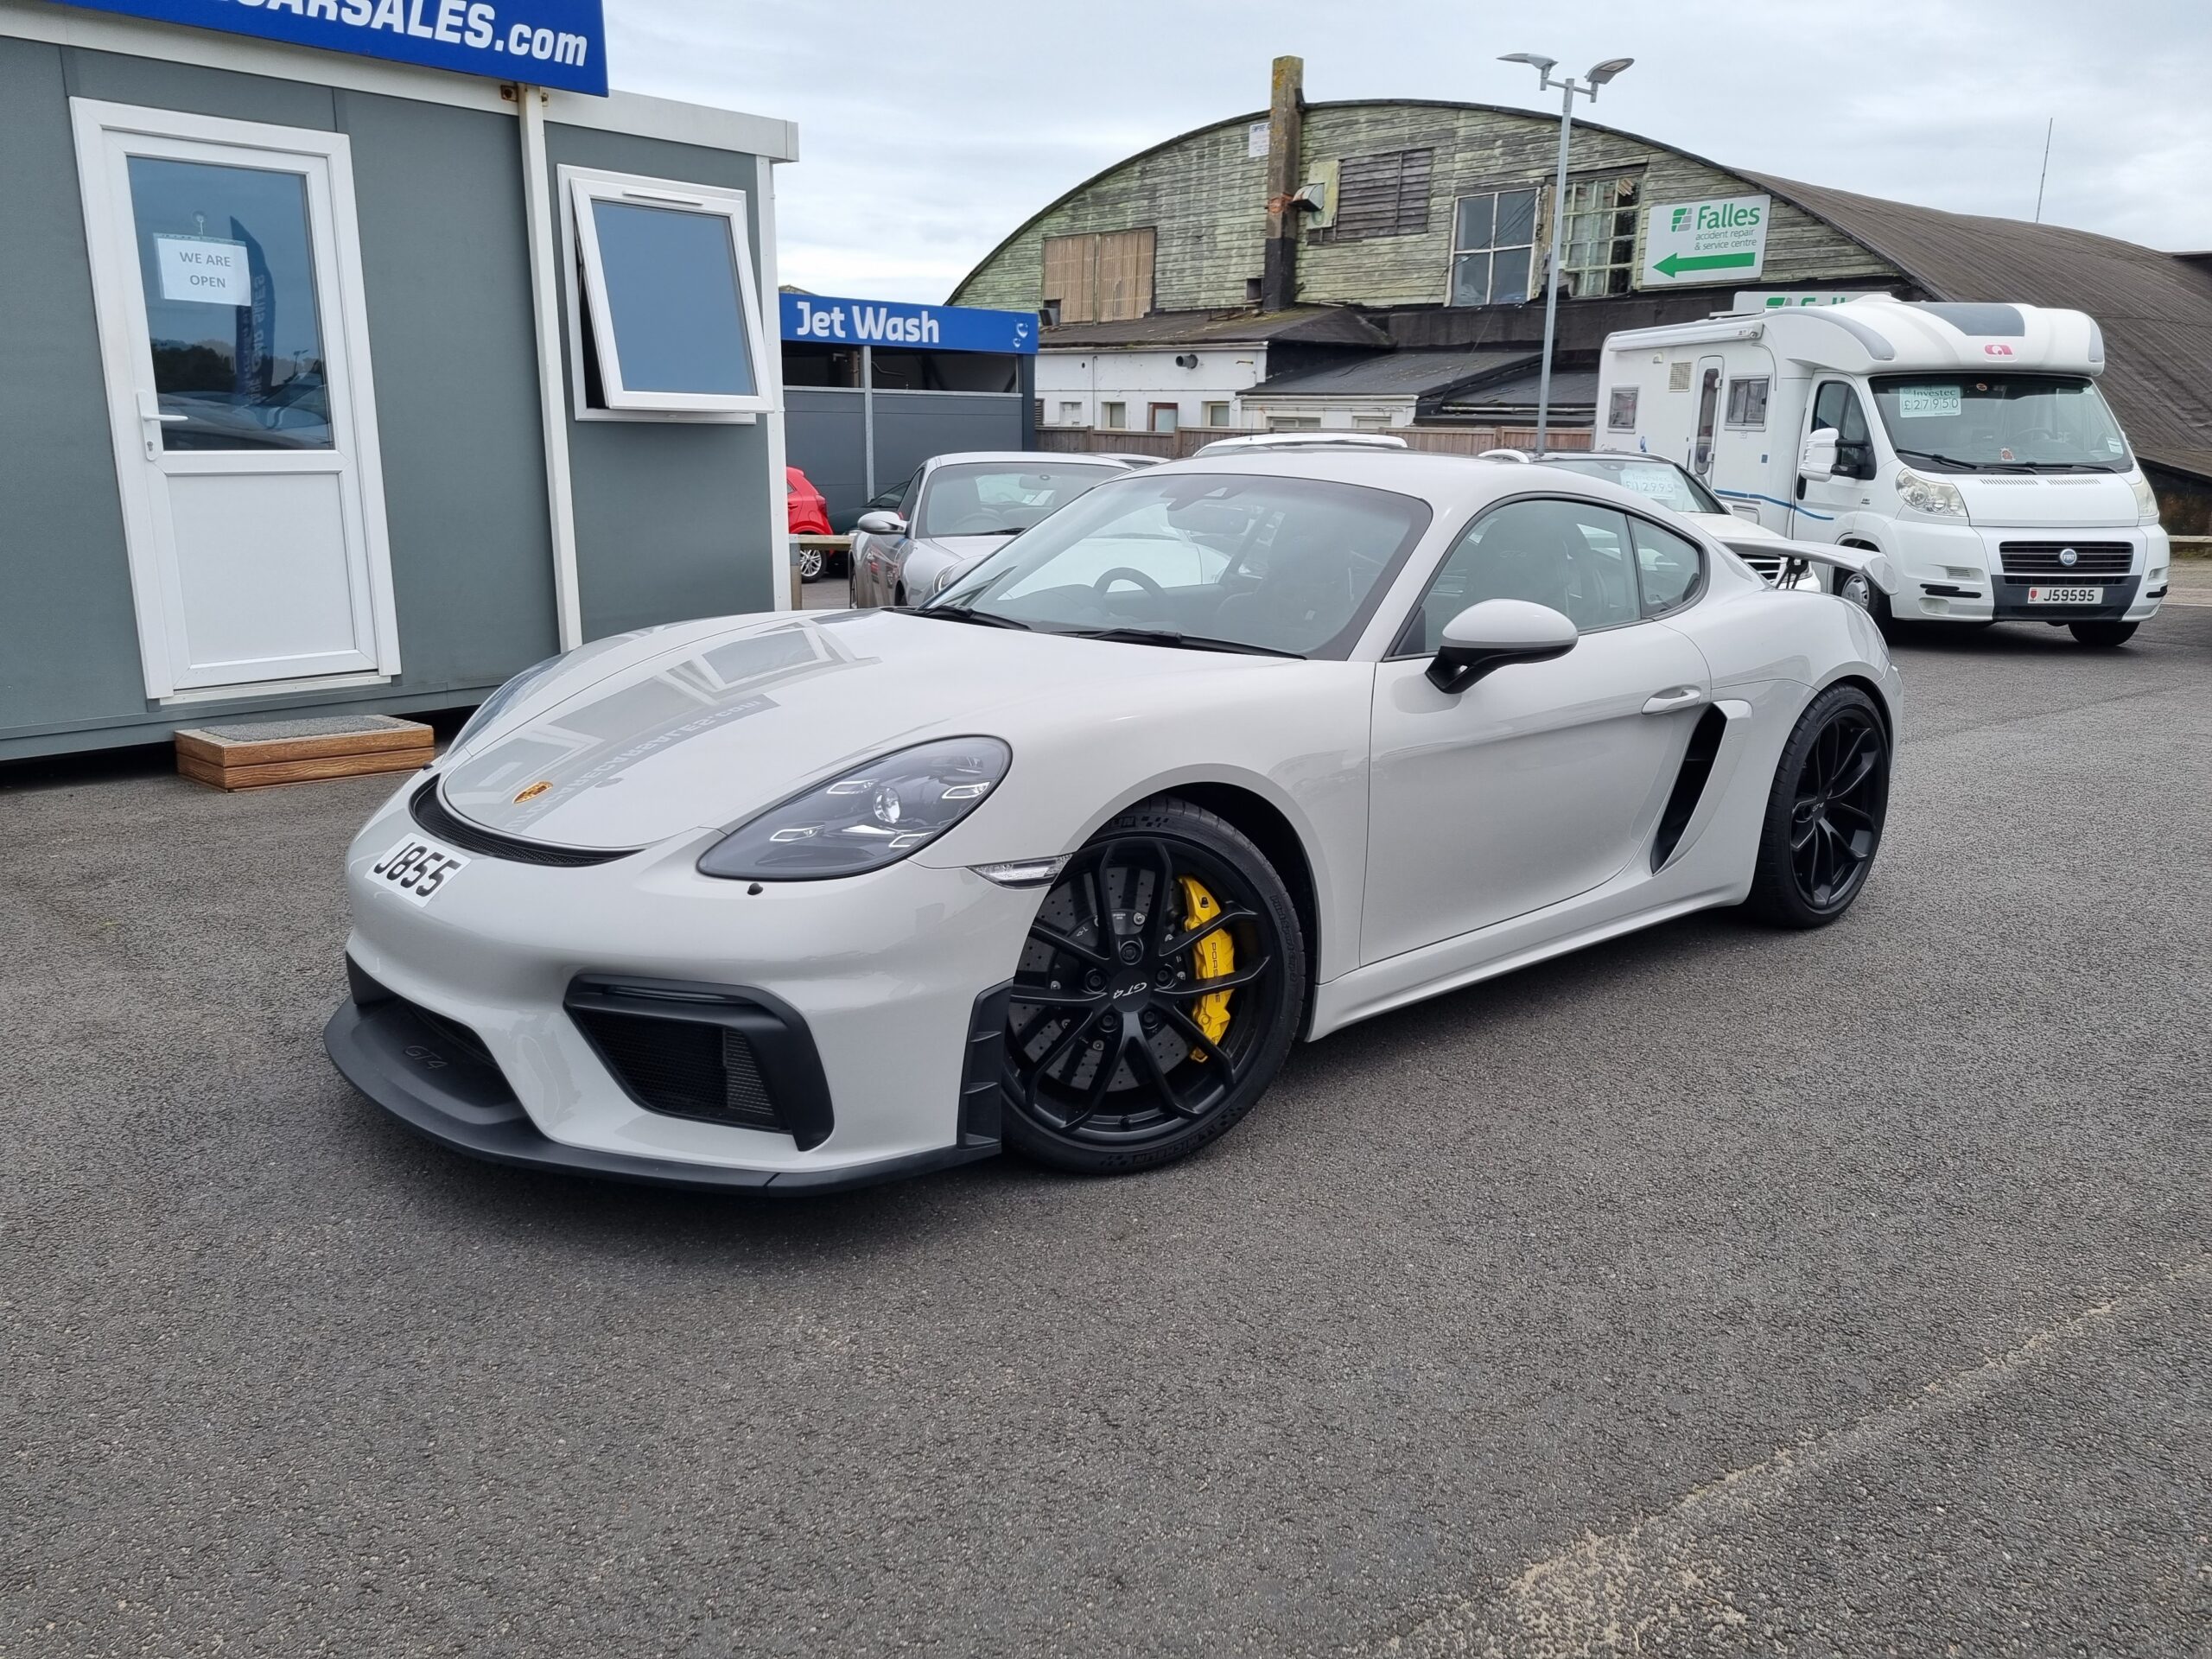 2020 Porsche Cayman Gt4 Club Sport 40 Coupe Only 1700 Miles18100 Worth Of Factory Options 11